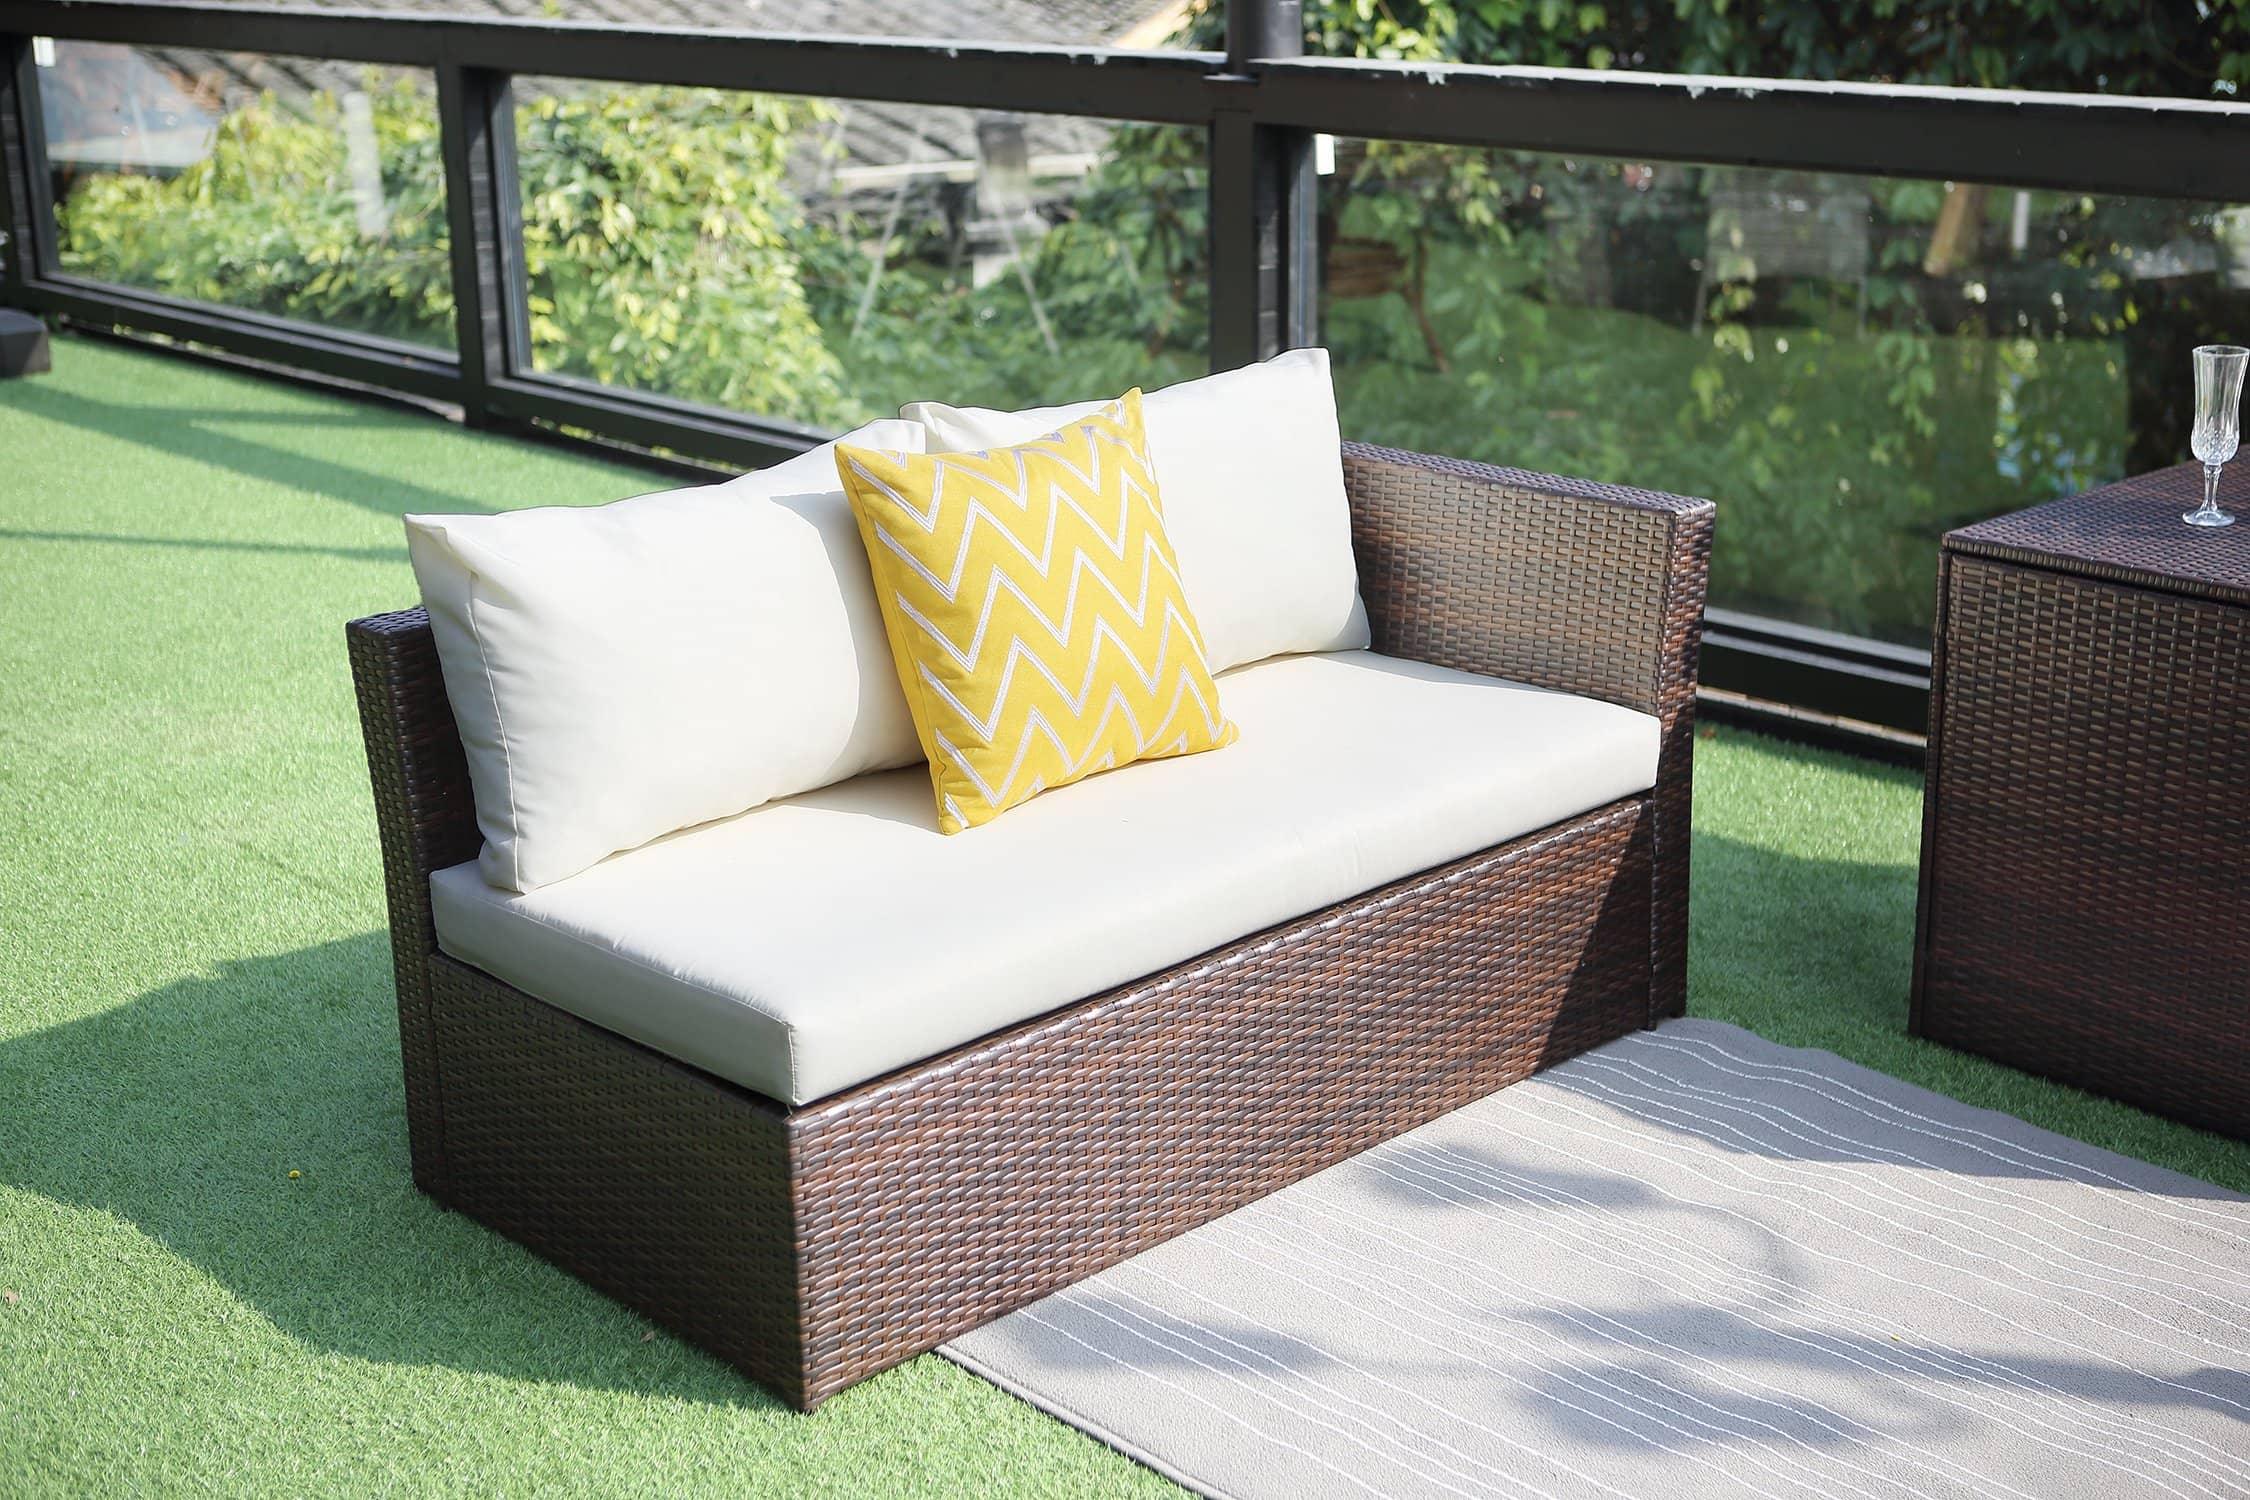 Cascade 4 Piece All Weather Wicker Sofa Seating Group with Cushions, Storage and Coffee Table with Storage